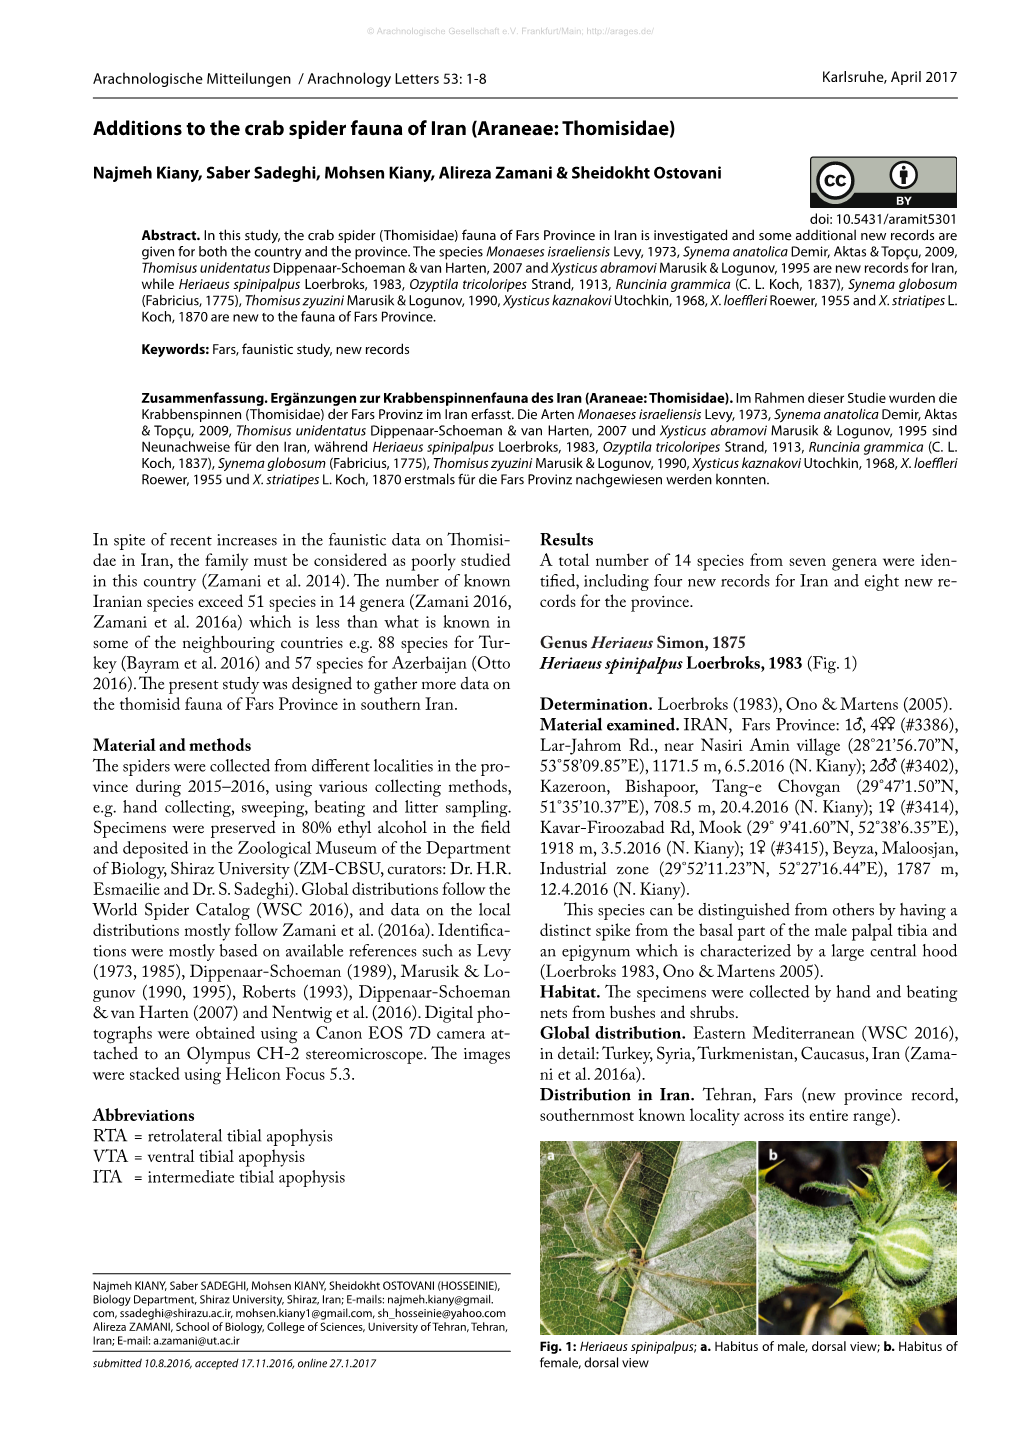 Additions to the Crab Spider Fauna of Iran (Araneae: Thomisidae)